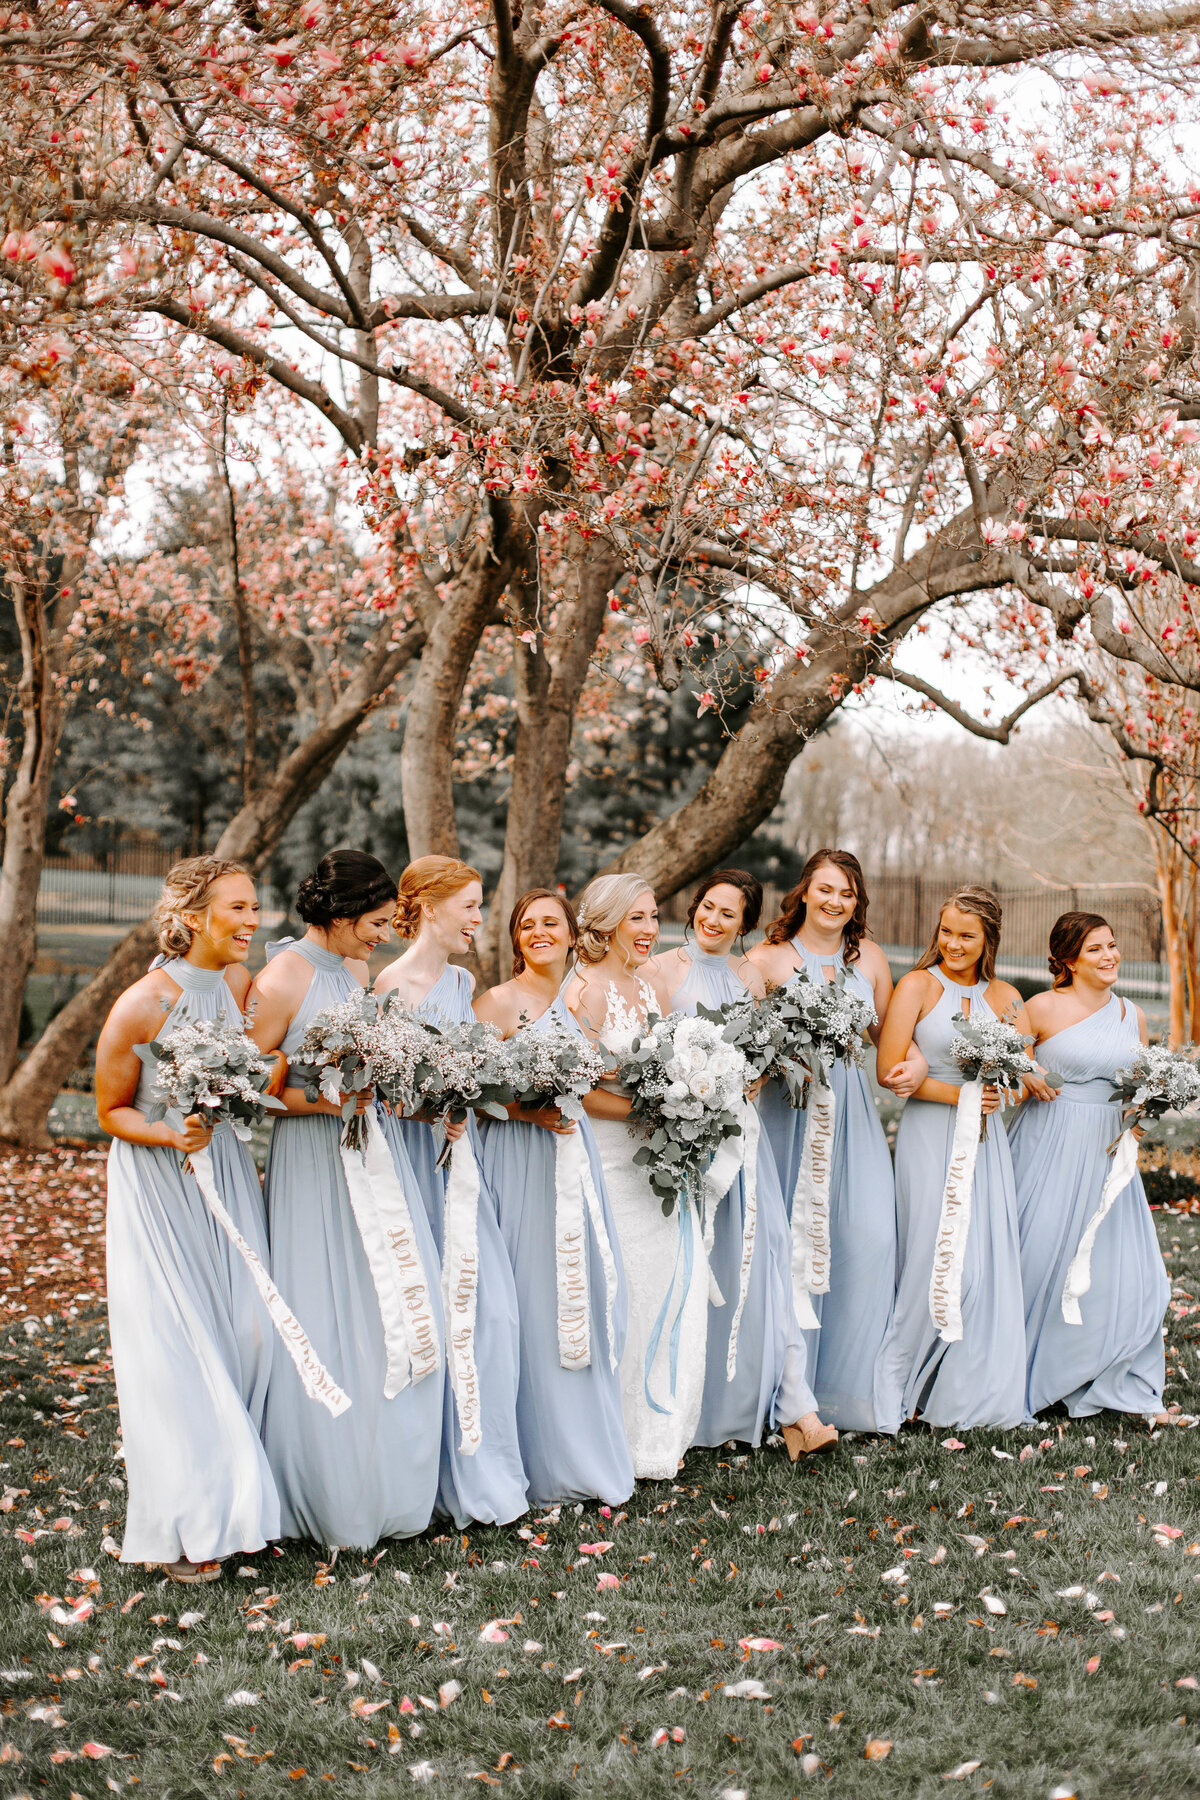 A bride surrounded by her bridesmaids as they stand under a pink blooming tree and pink petals are covering the ground